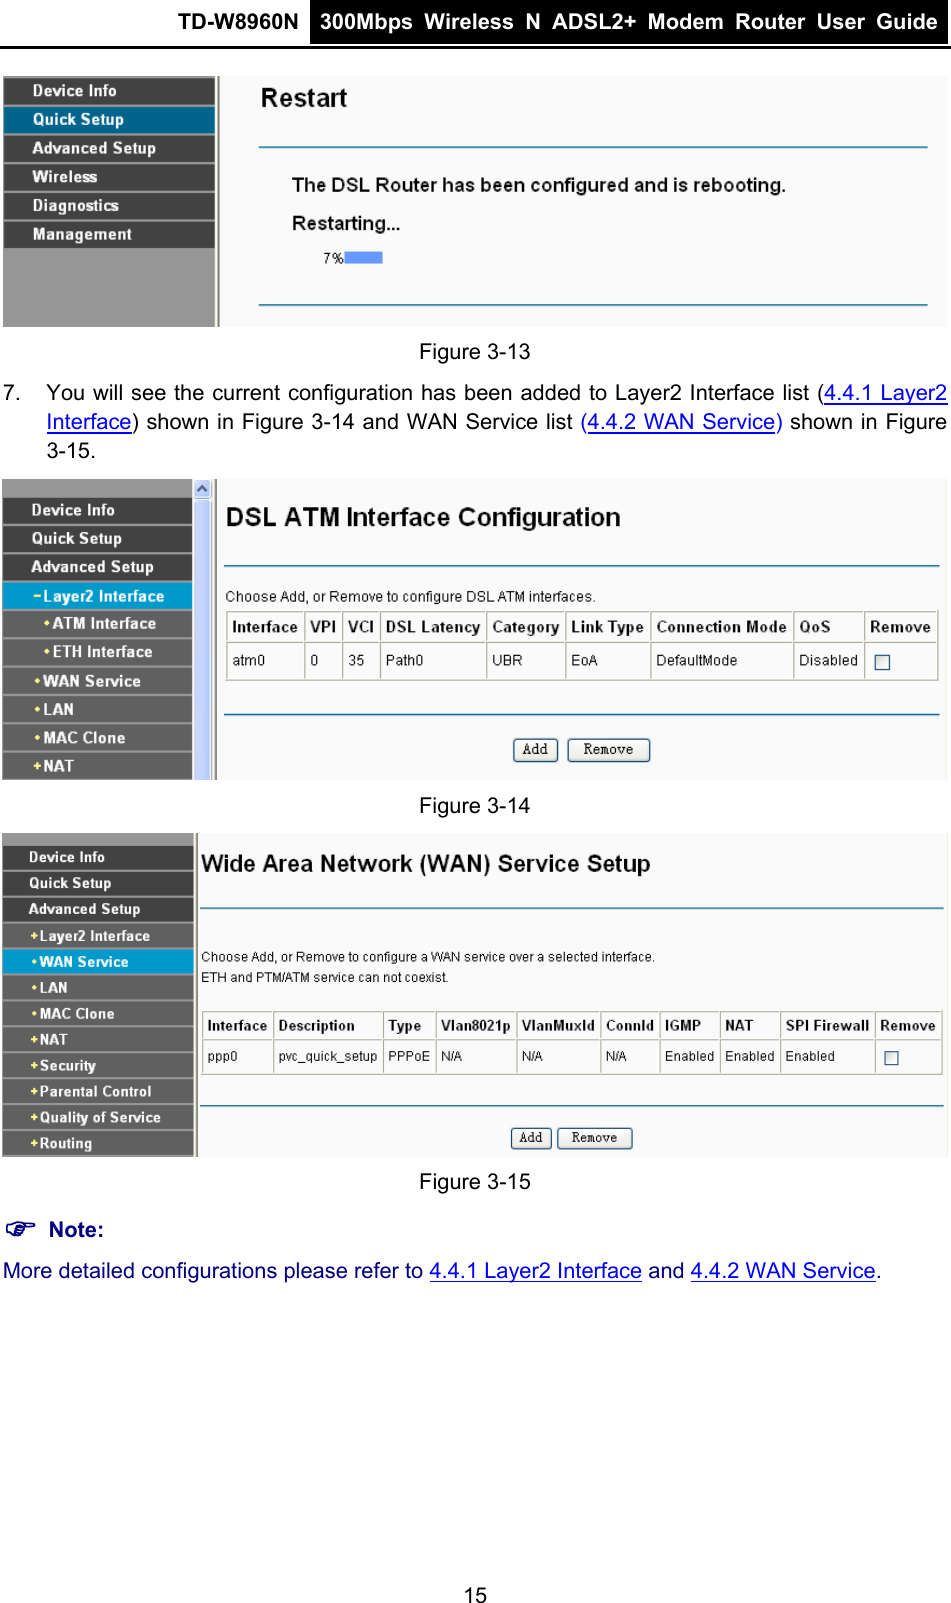 TD-W8960N  300Mbps Wireless N ADSL2+ Modem Router User Guide   Figure 3-13 7.  You will see the current configuration has been added to Layer2 Interface list (4.4.1 Layer2 Interface) shown in Figure 3-14 and WAN Service list (4.4.2 WAN Service) shown in Figure 3-15.  Figure 3-14  Figure 3-15   ) Note: More detailed configurations please refer to 4.4.1 Layer2 Interface and 4.4.2 WAN Service. 15 